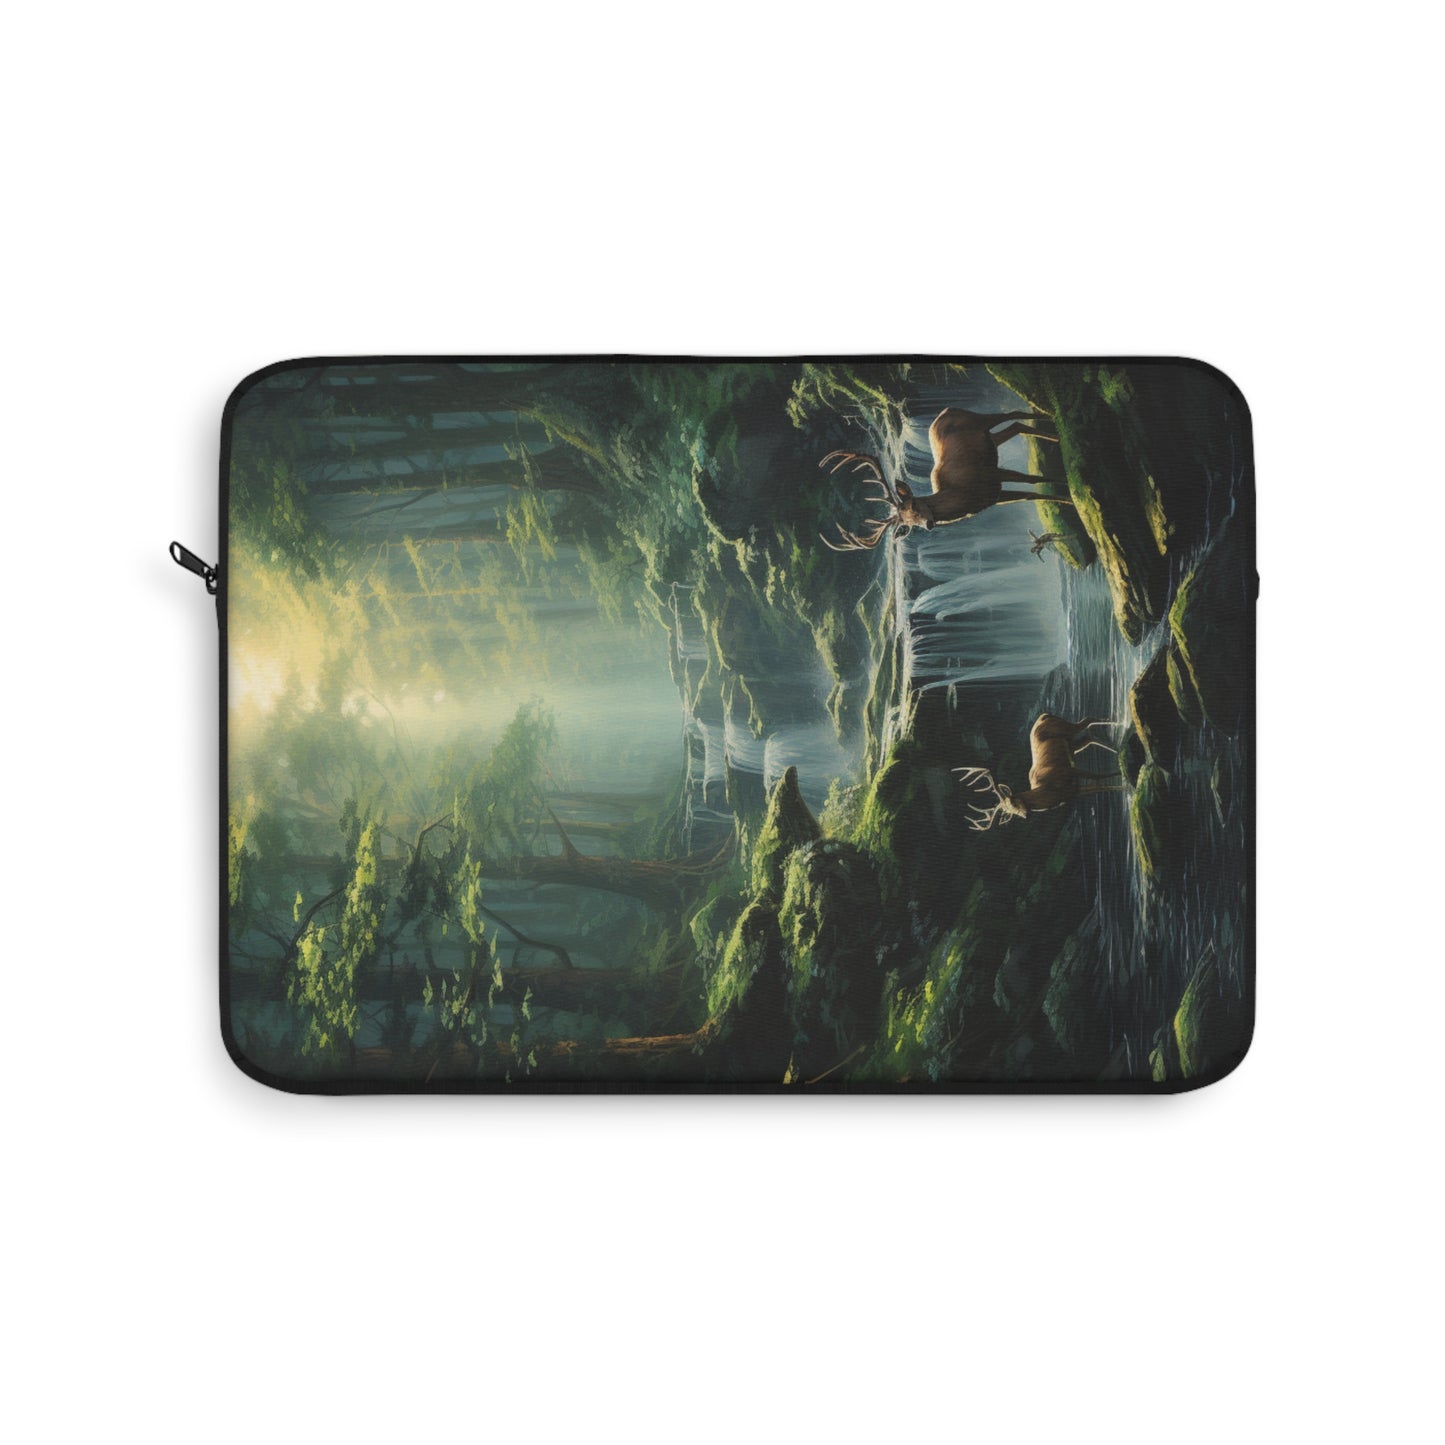 Waterfall of Life Laptop Sleeve | Tablet Cover Deer Buck Stag Waterfall Forest Woods Nature God's Country Outdoors Computer Case Beautiful